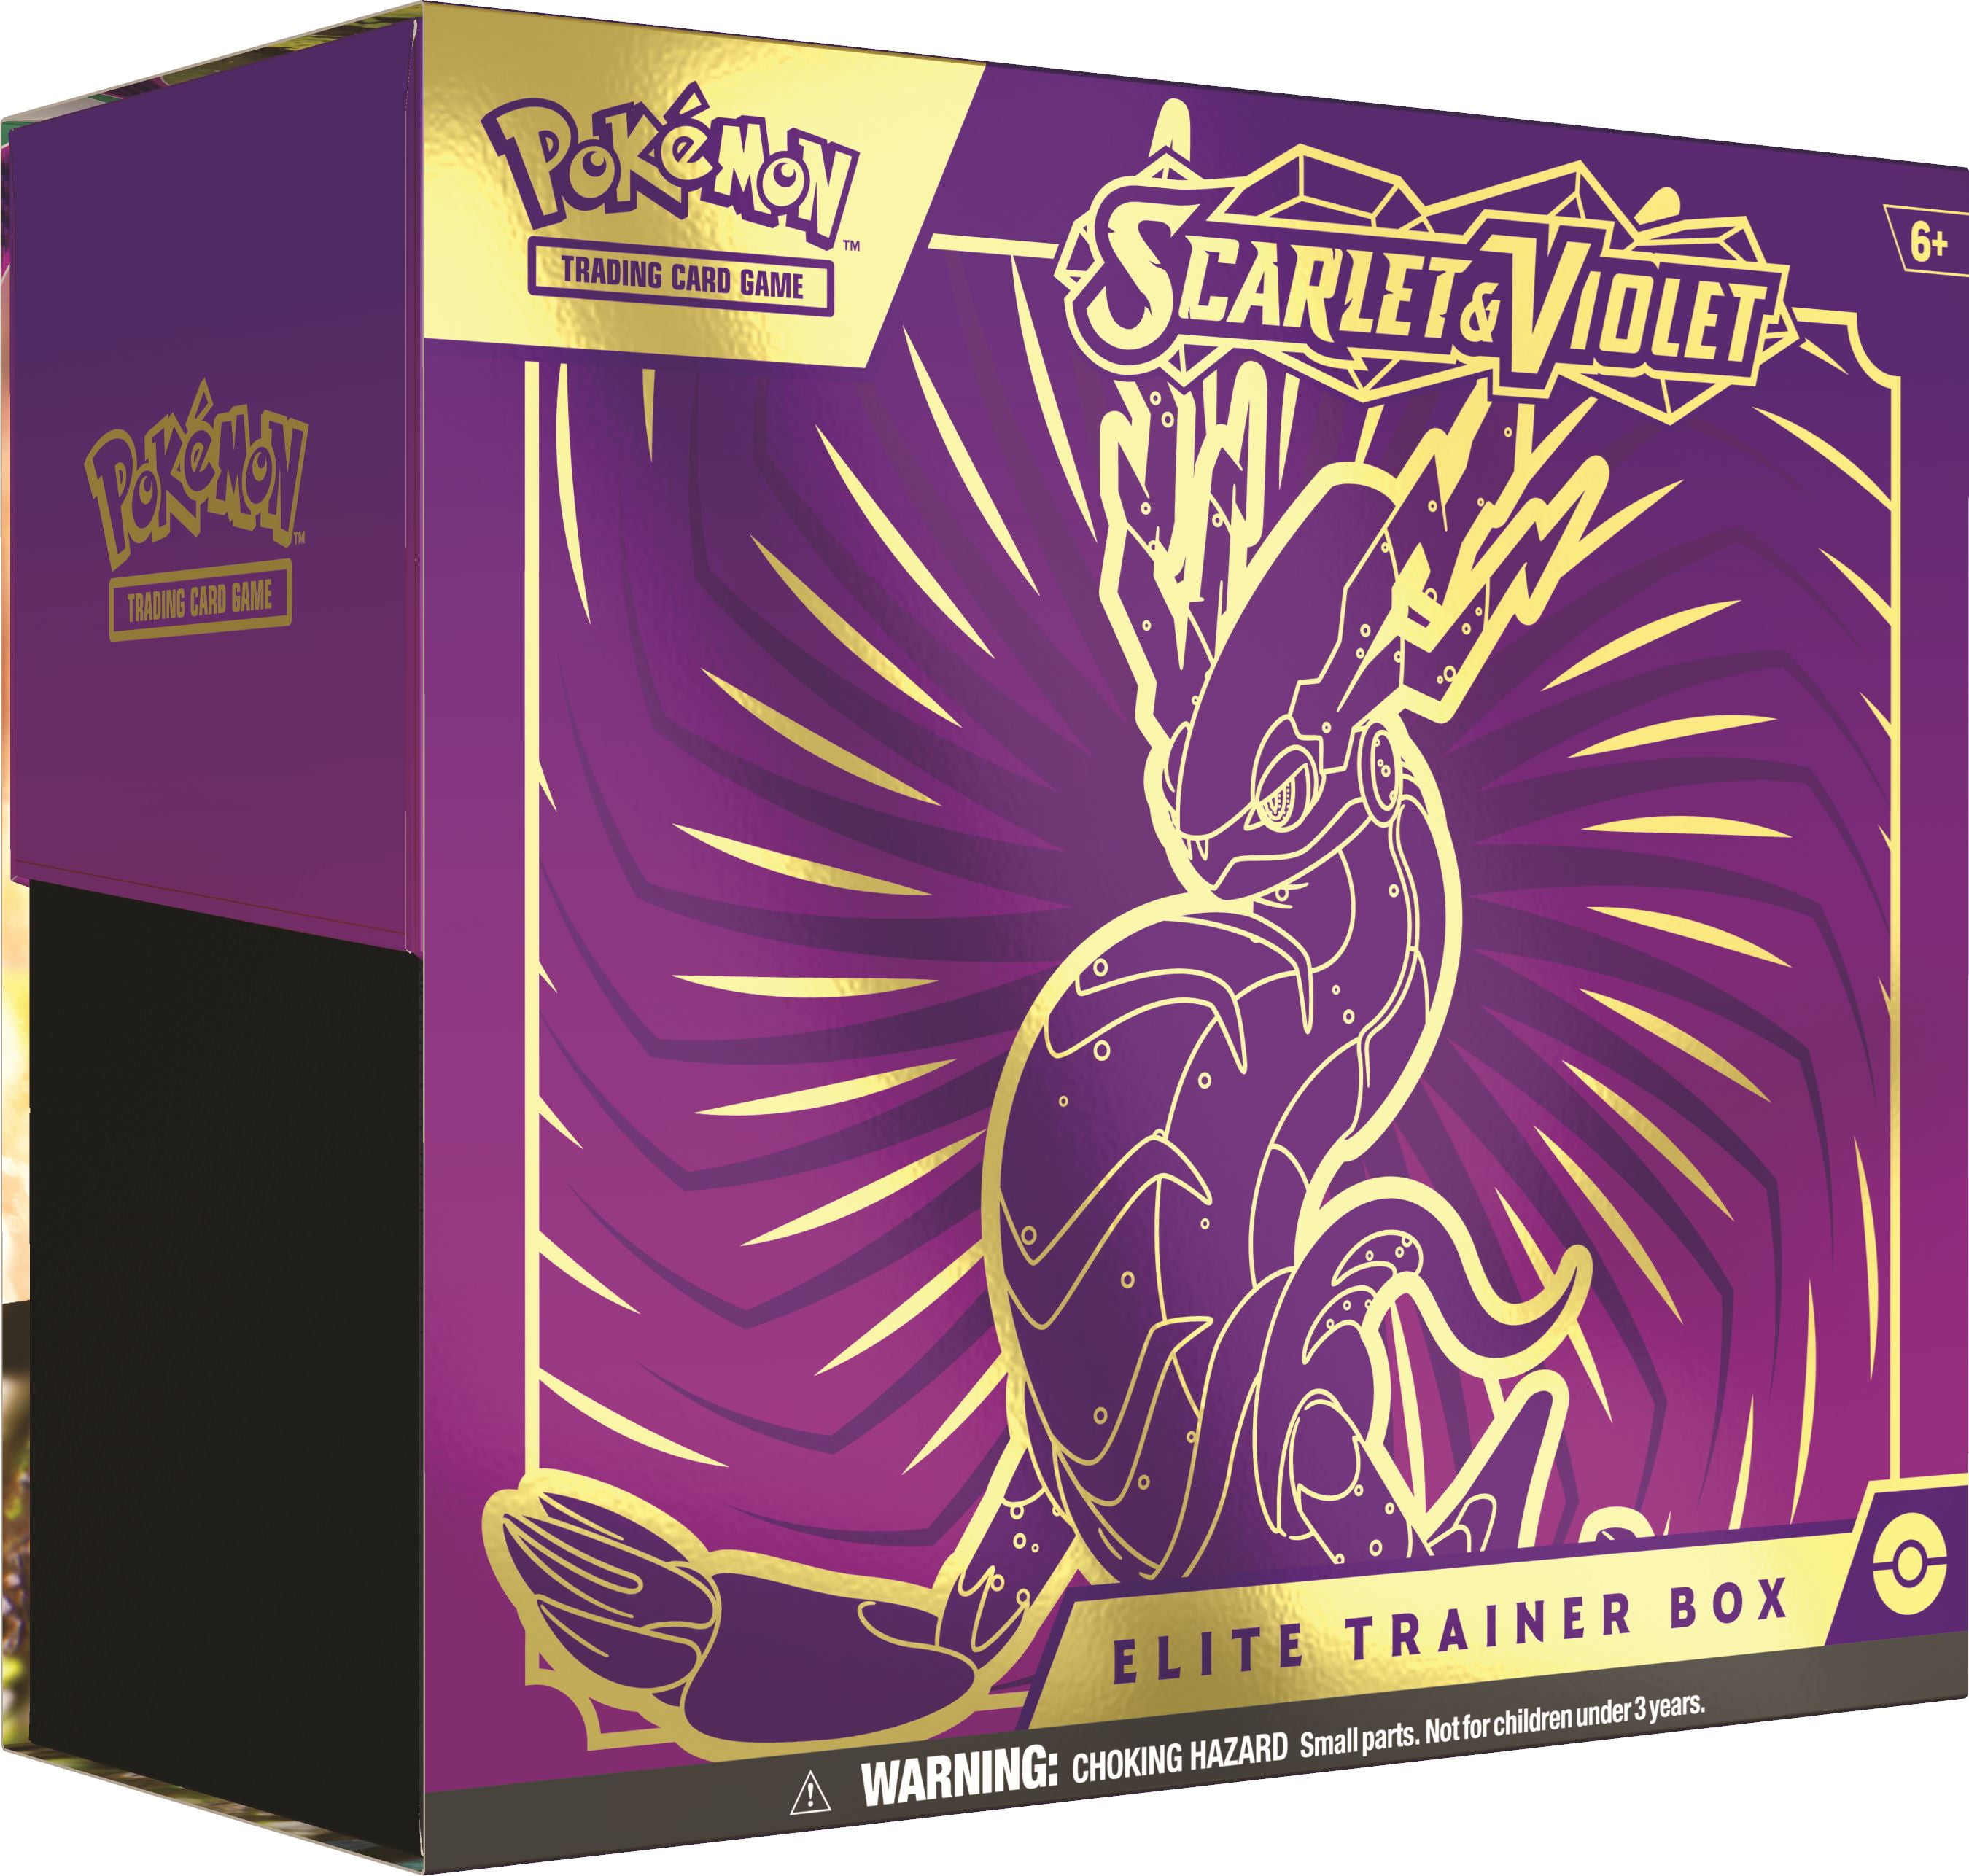 Pokémon Trading Card Game Online - Trainer Challenge Now Available